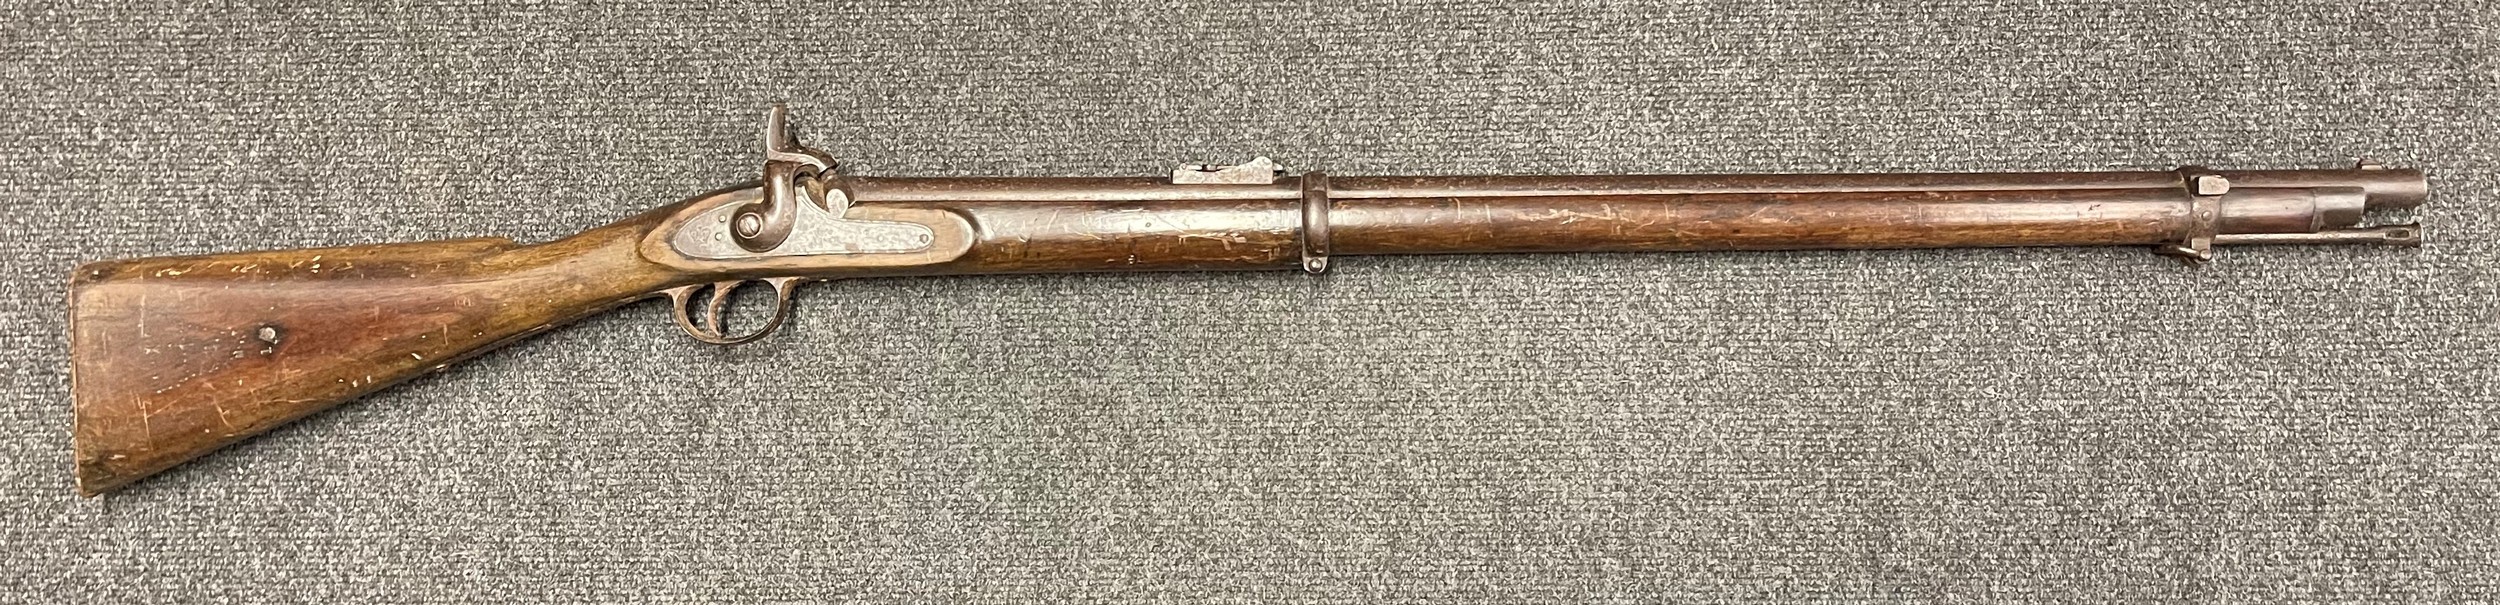 British Military "Bar on Band" Enfield Short Percussion Cap Rifle. Working action. 83cm long barrel.